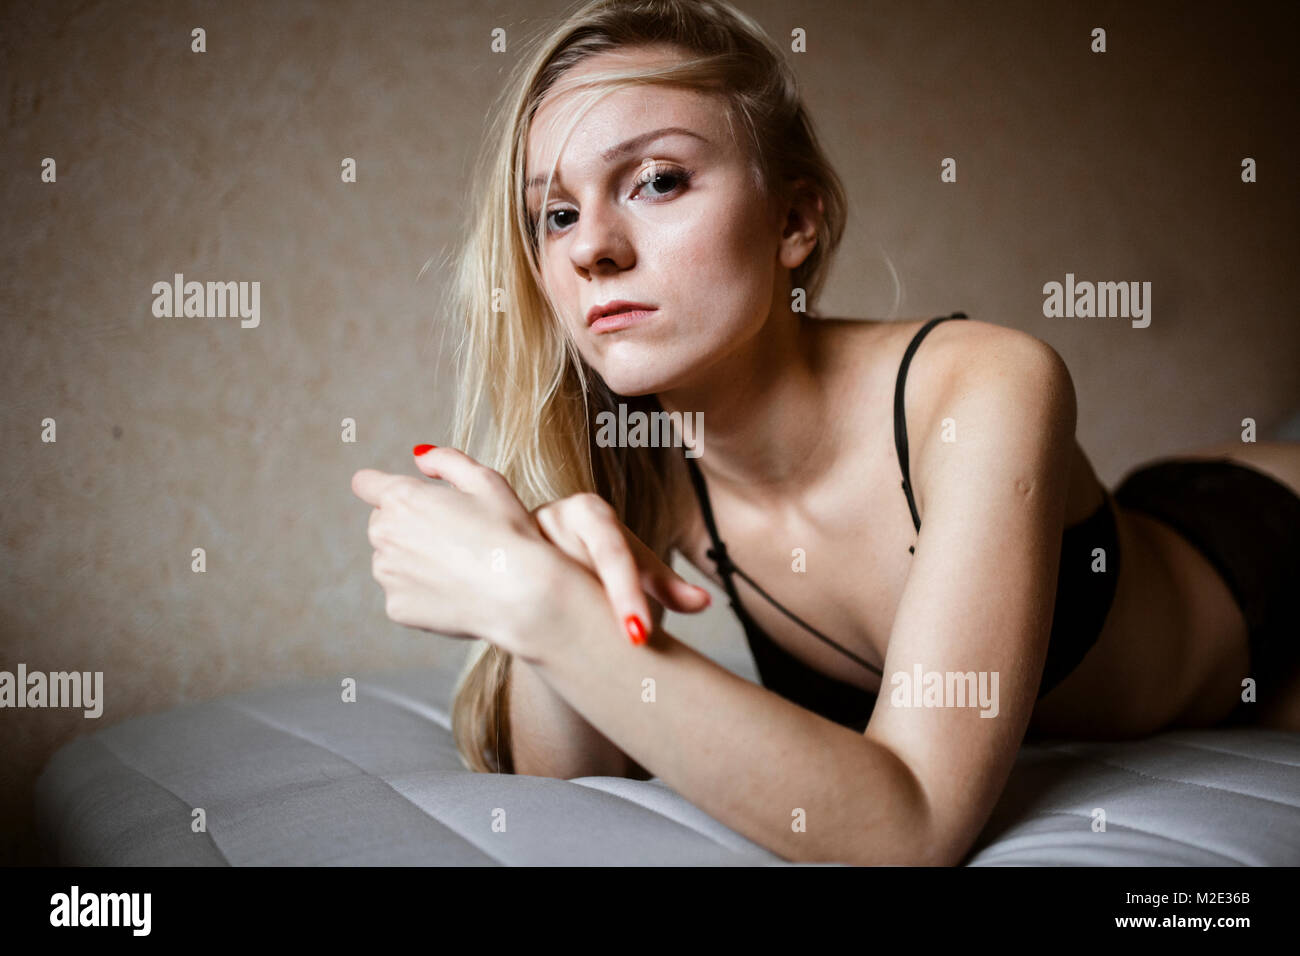 Close up of serious Caucasian woman resting on bed Stock Photo